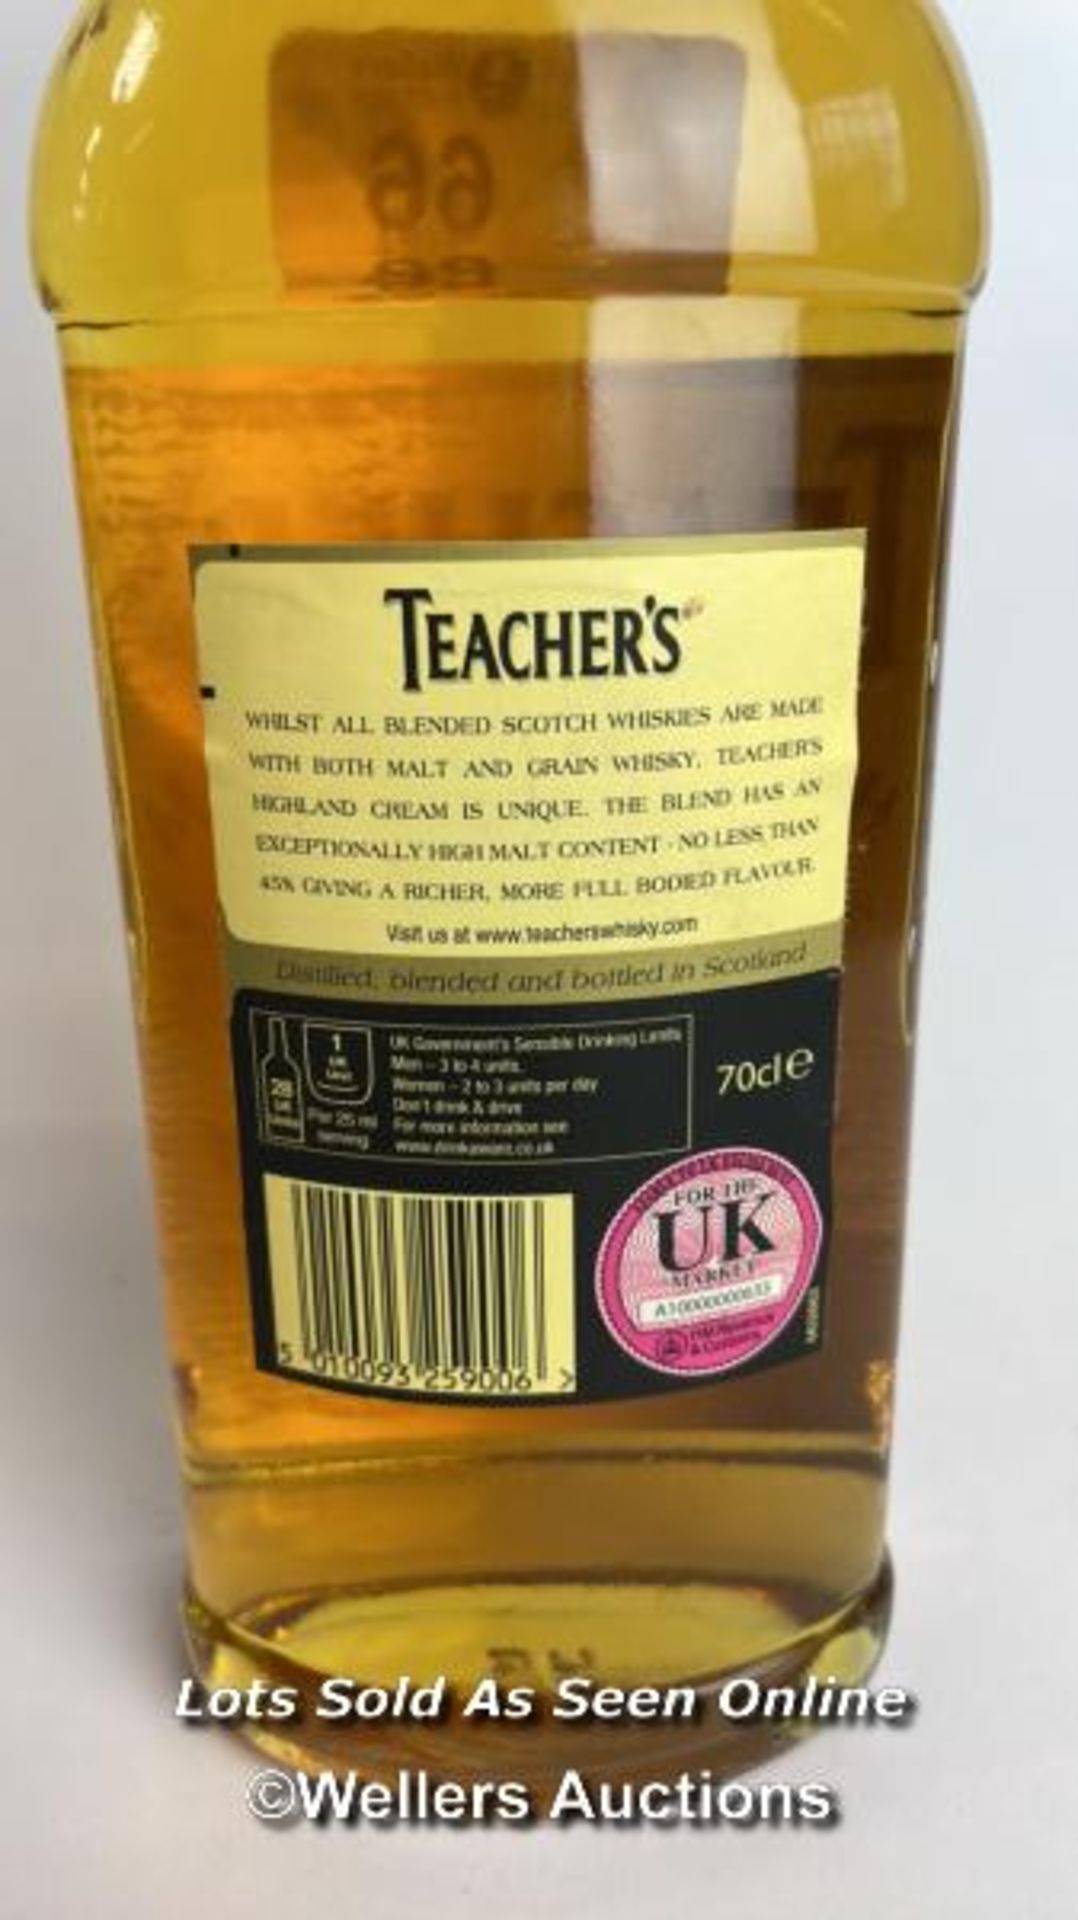 Teachers Highland Cream Scotch Whisky, 70cl, 43% vol / Please see images for fill level and - Image 5 of 5